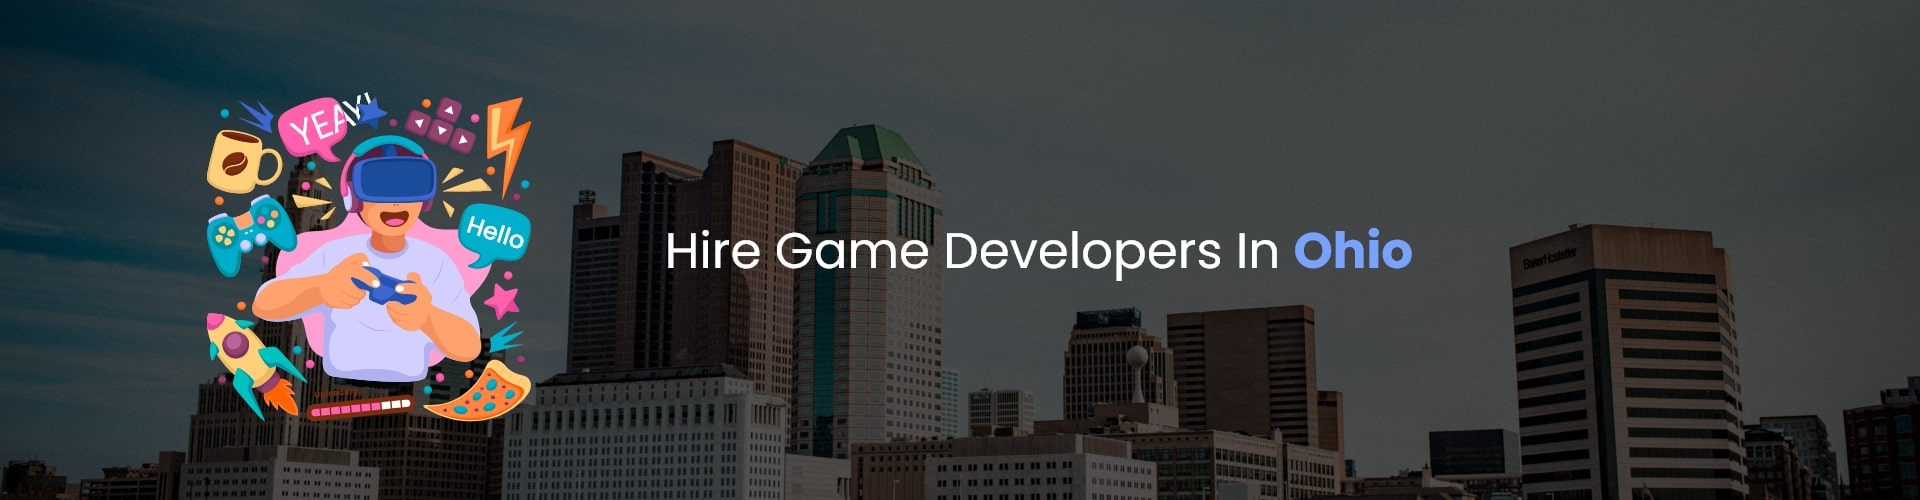 hire game developers in ohio